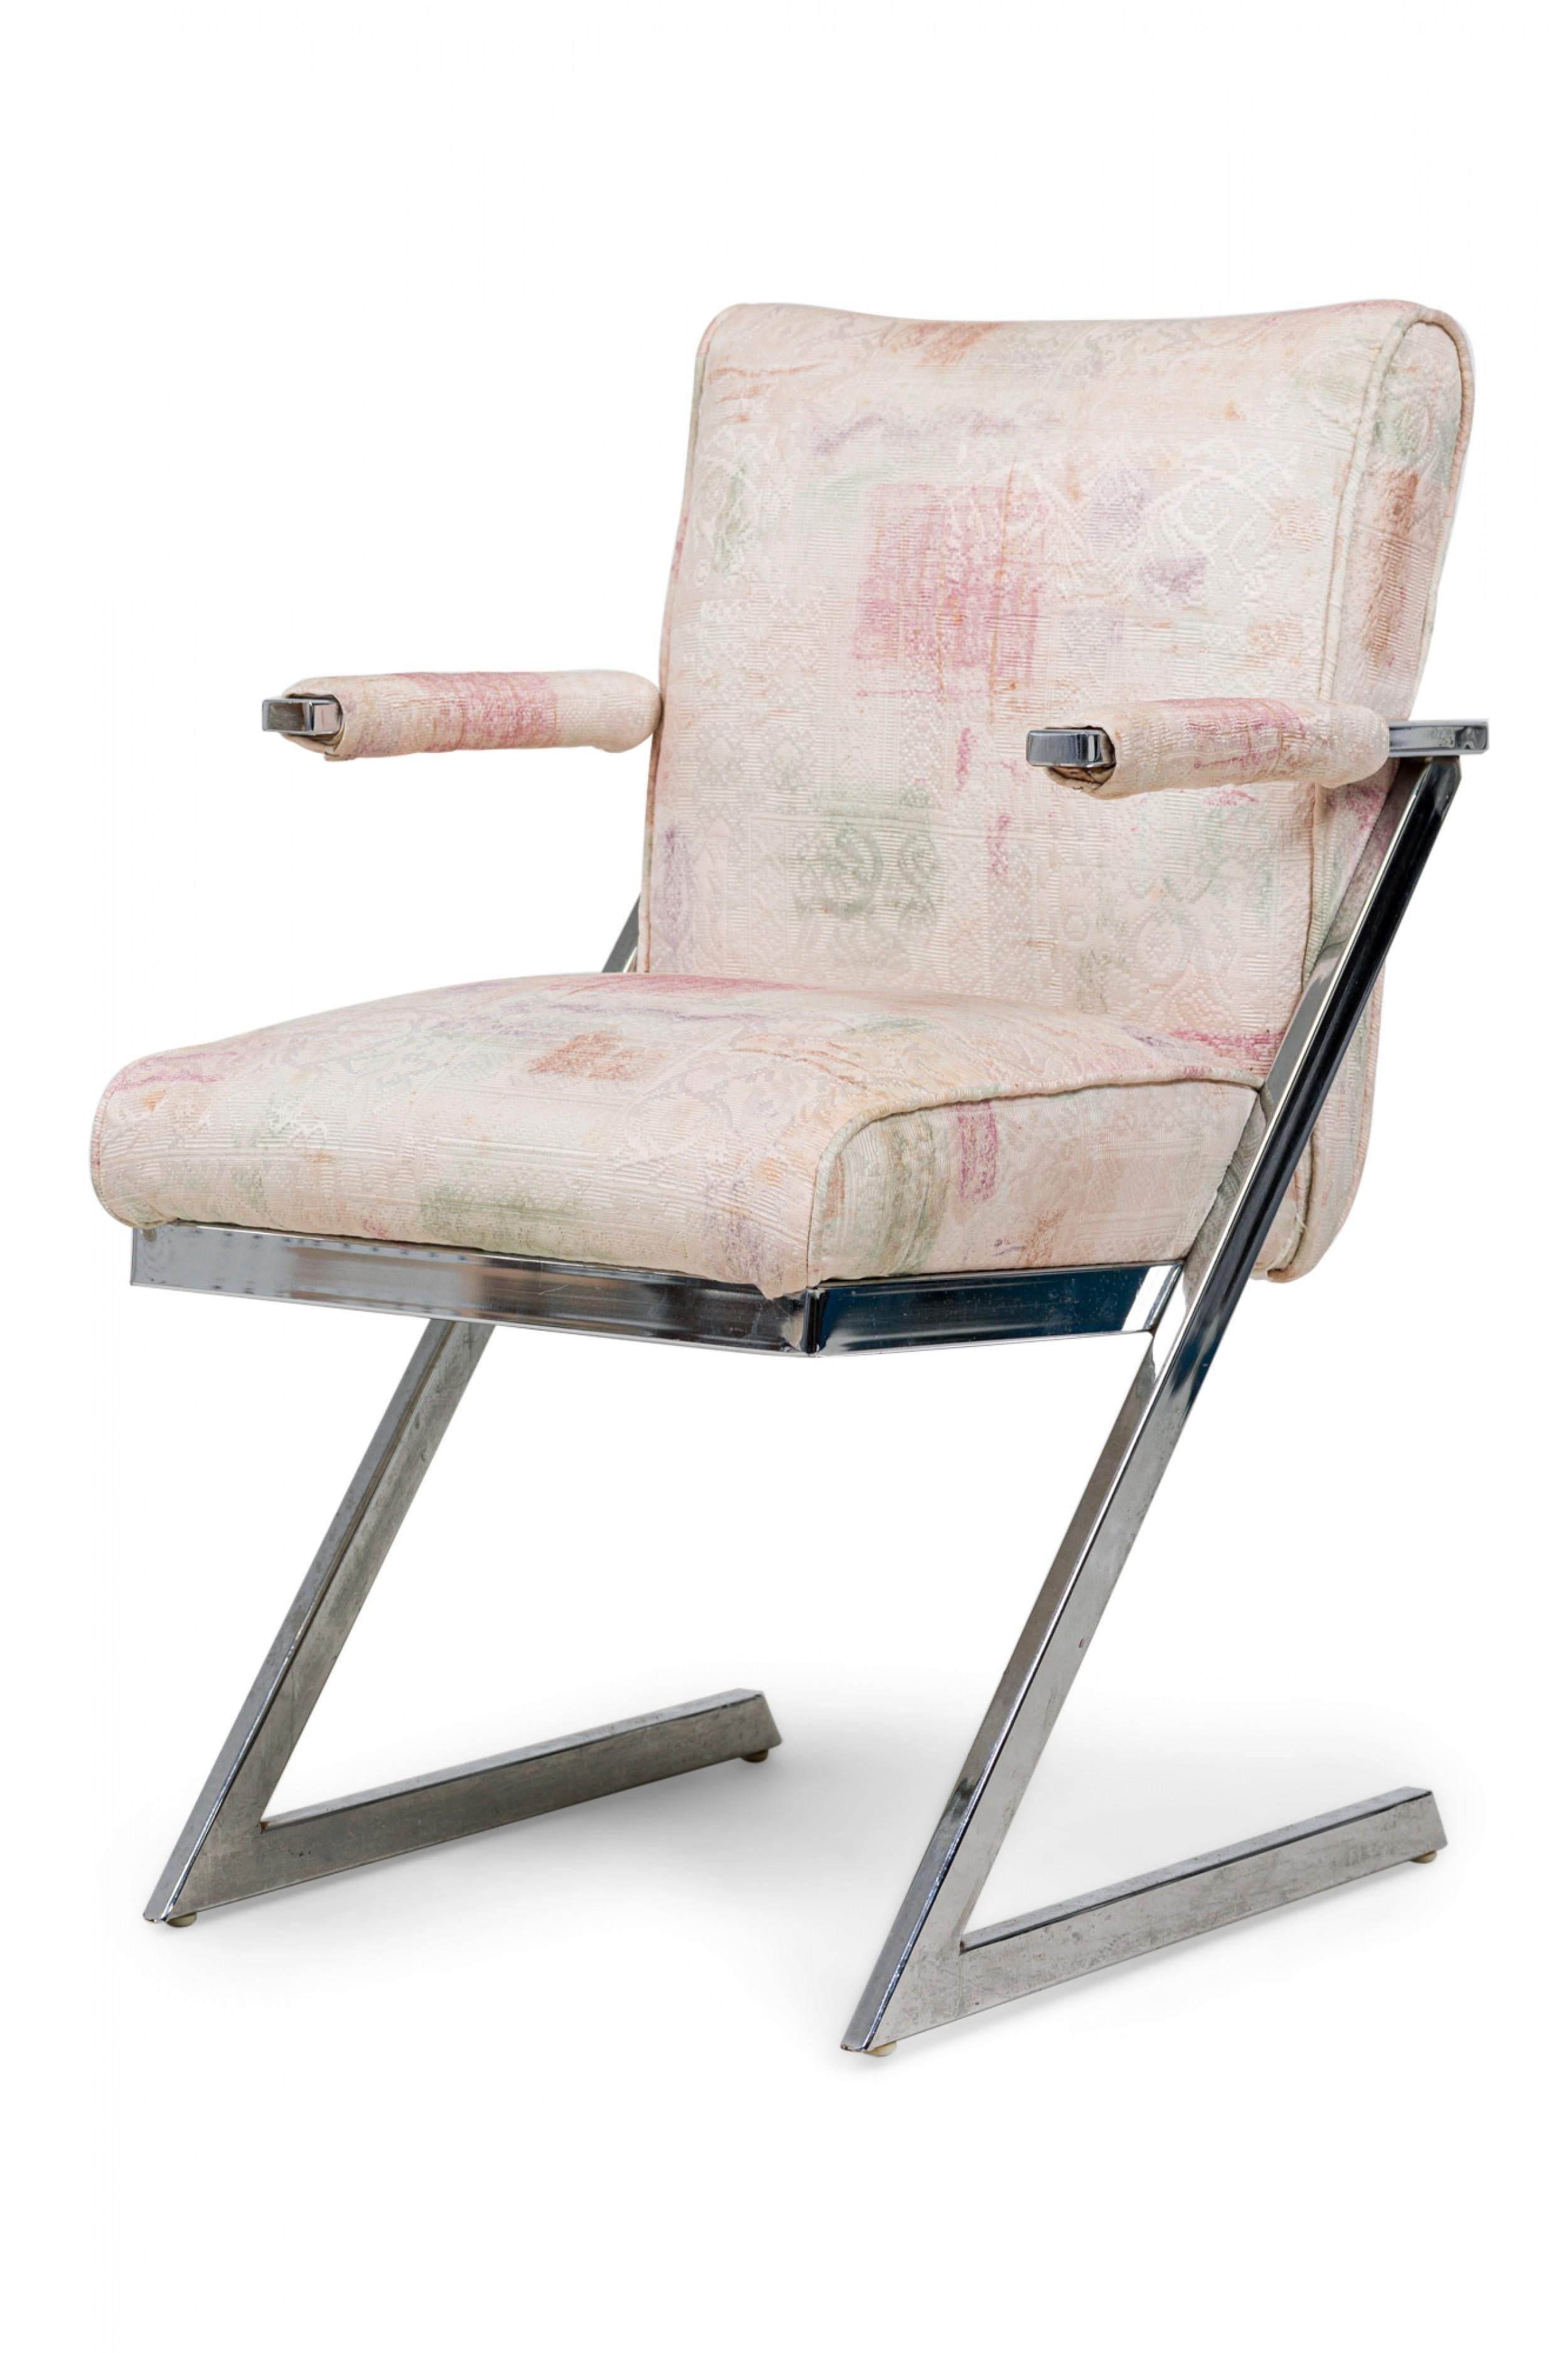 SET of 6 midcentury (1980s) American Z Chairs (2 armchairs, 4 side chairs) in cantilevered flat bar chromed steel, upholstered in a textured beige fabric with muted tints of brown, green and pink. (DESIGN INSTITUTE OF AMERICA) (PRICED AS SET).